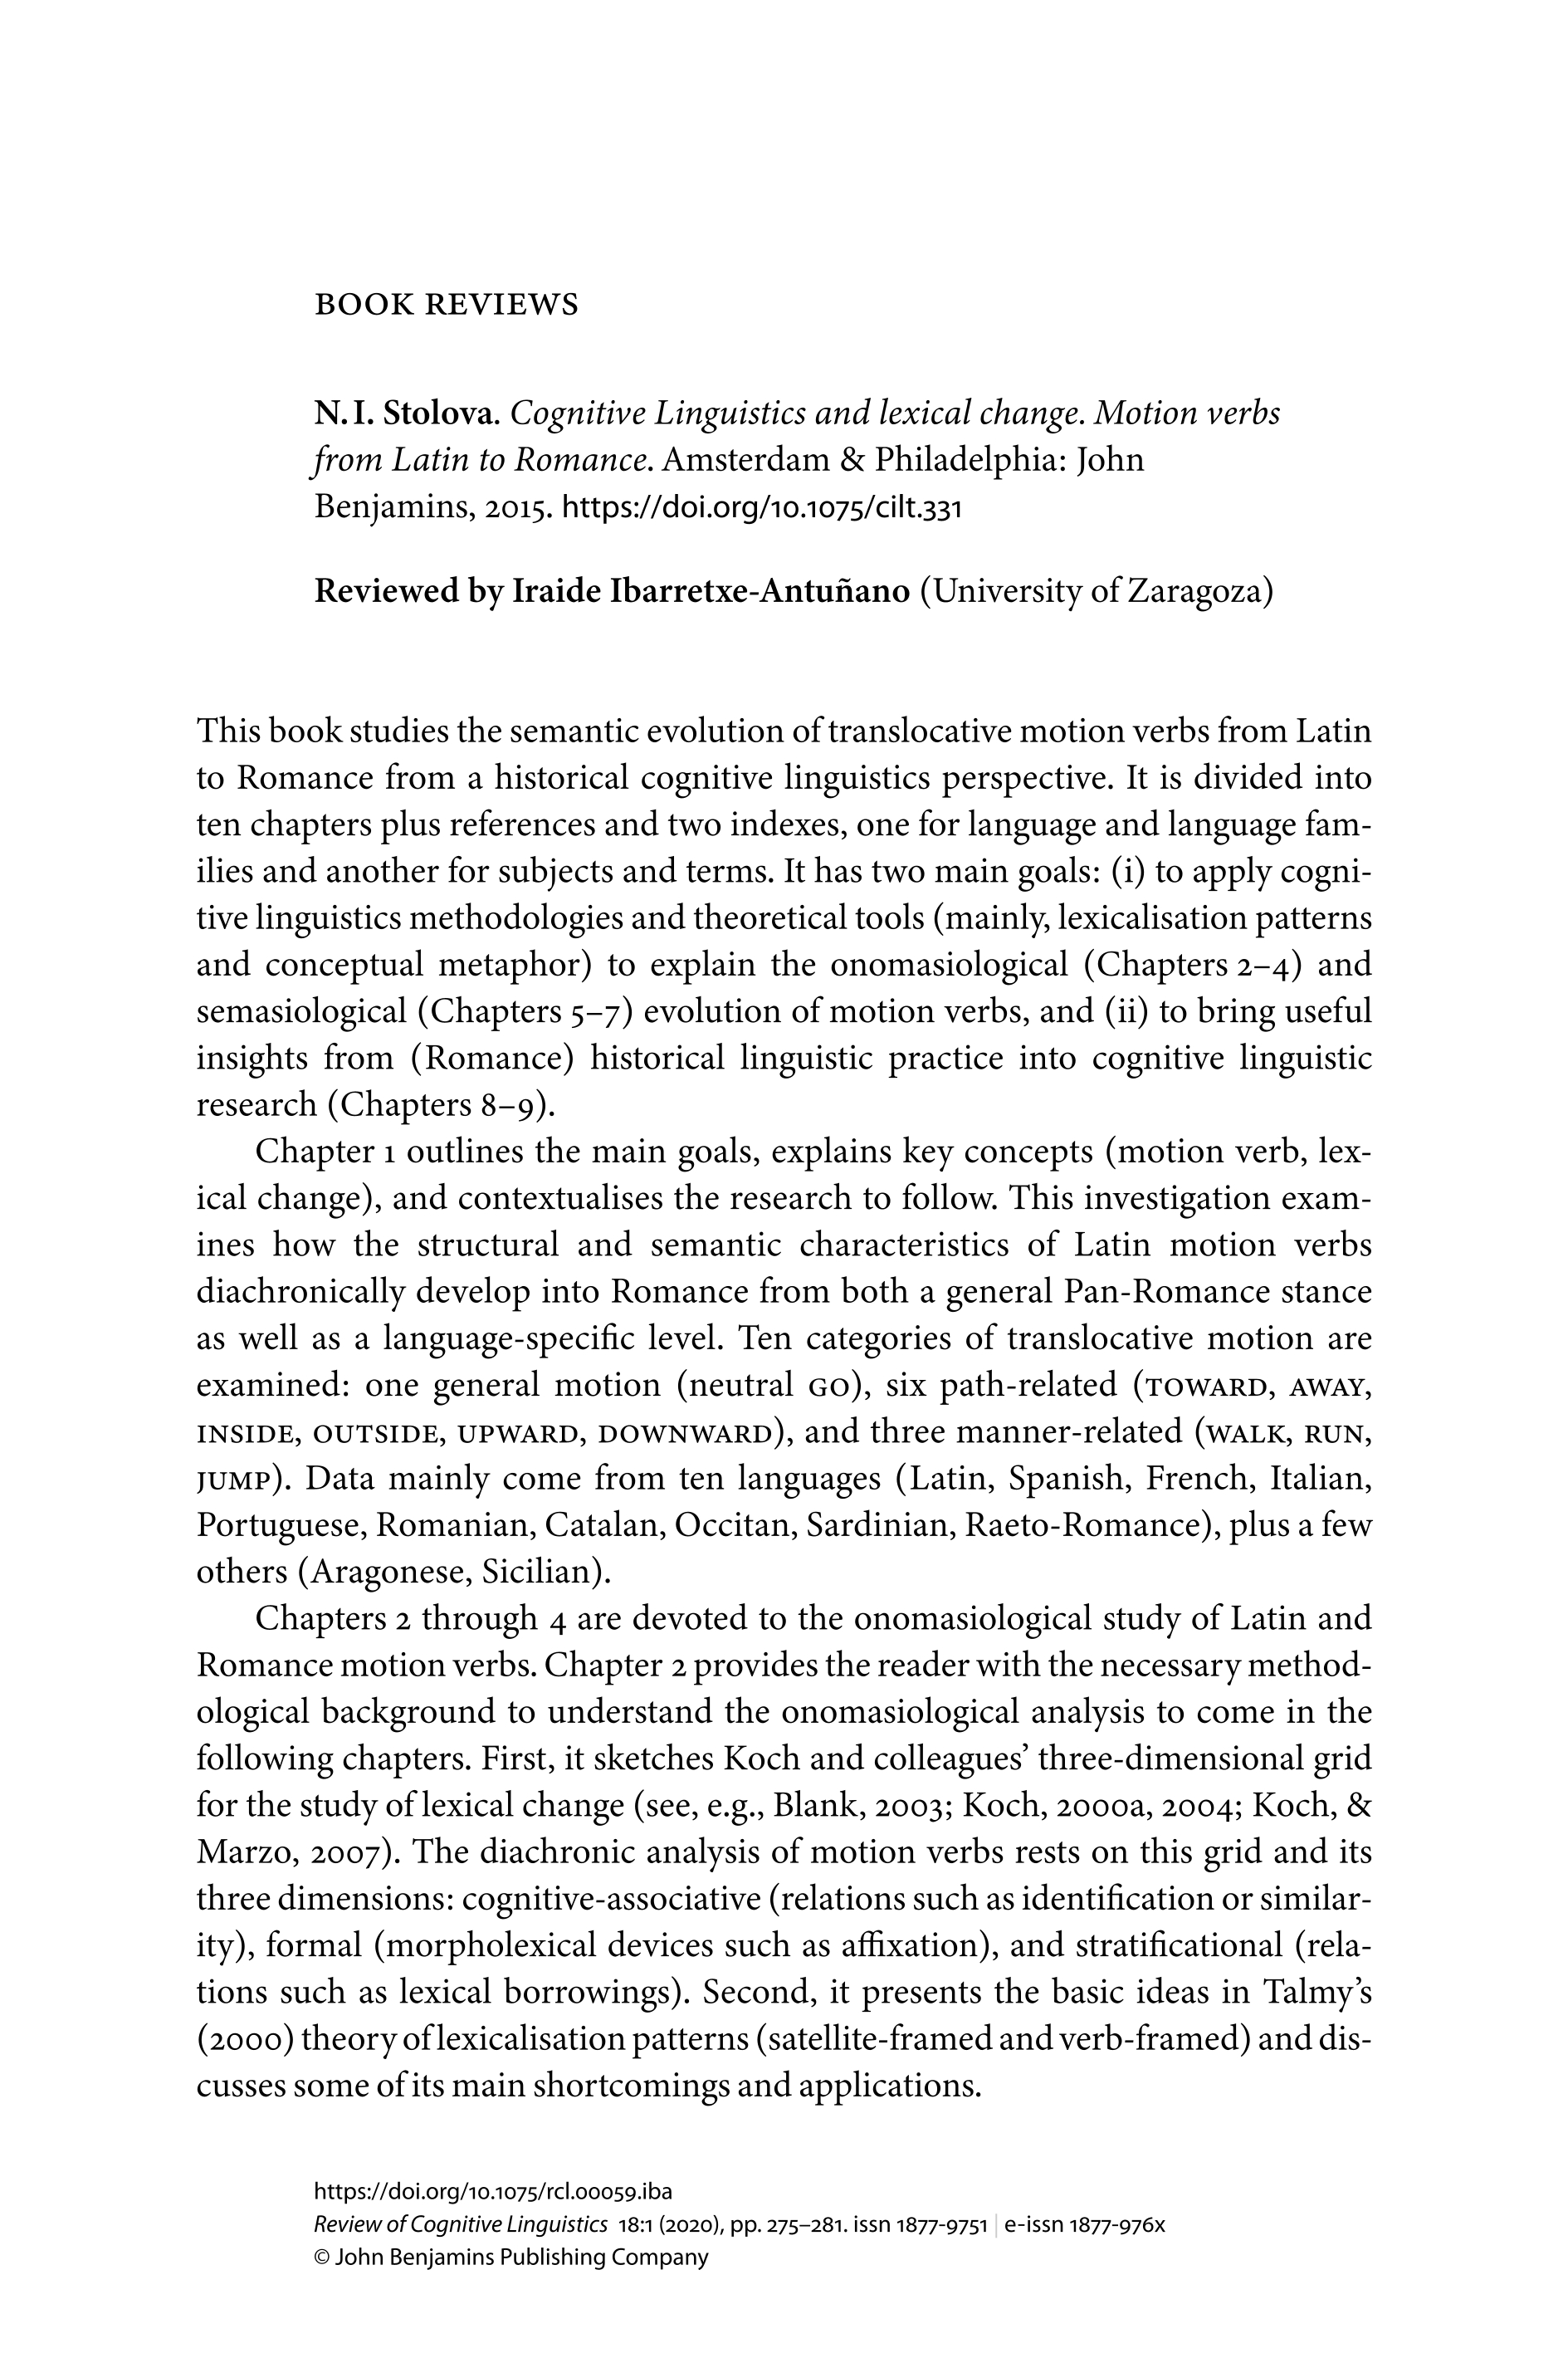 Book review: N.I. Stolova. Cognitive Linguistics and lexical change. Motion verbs from Latin to Romance. Amsterdam & Philadelphia: John Benjamins, 2015